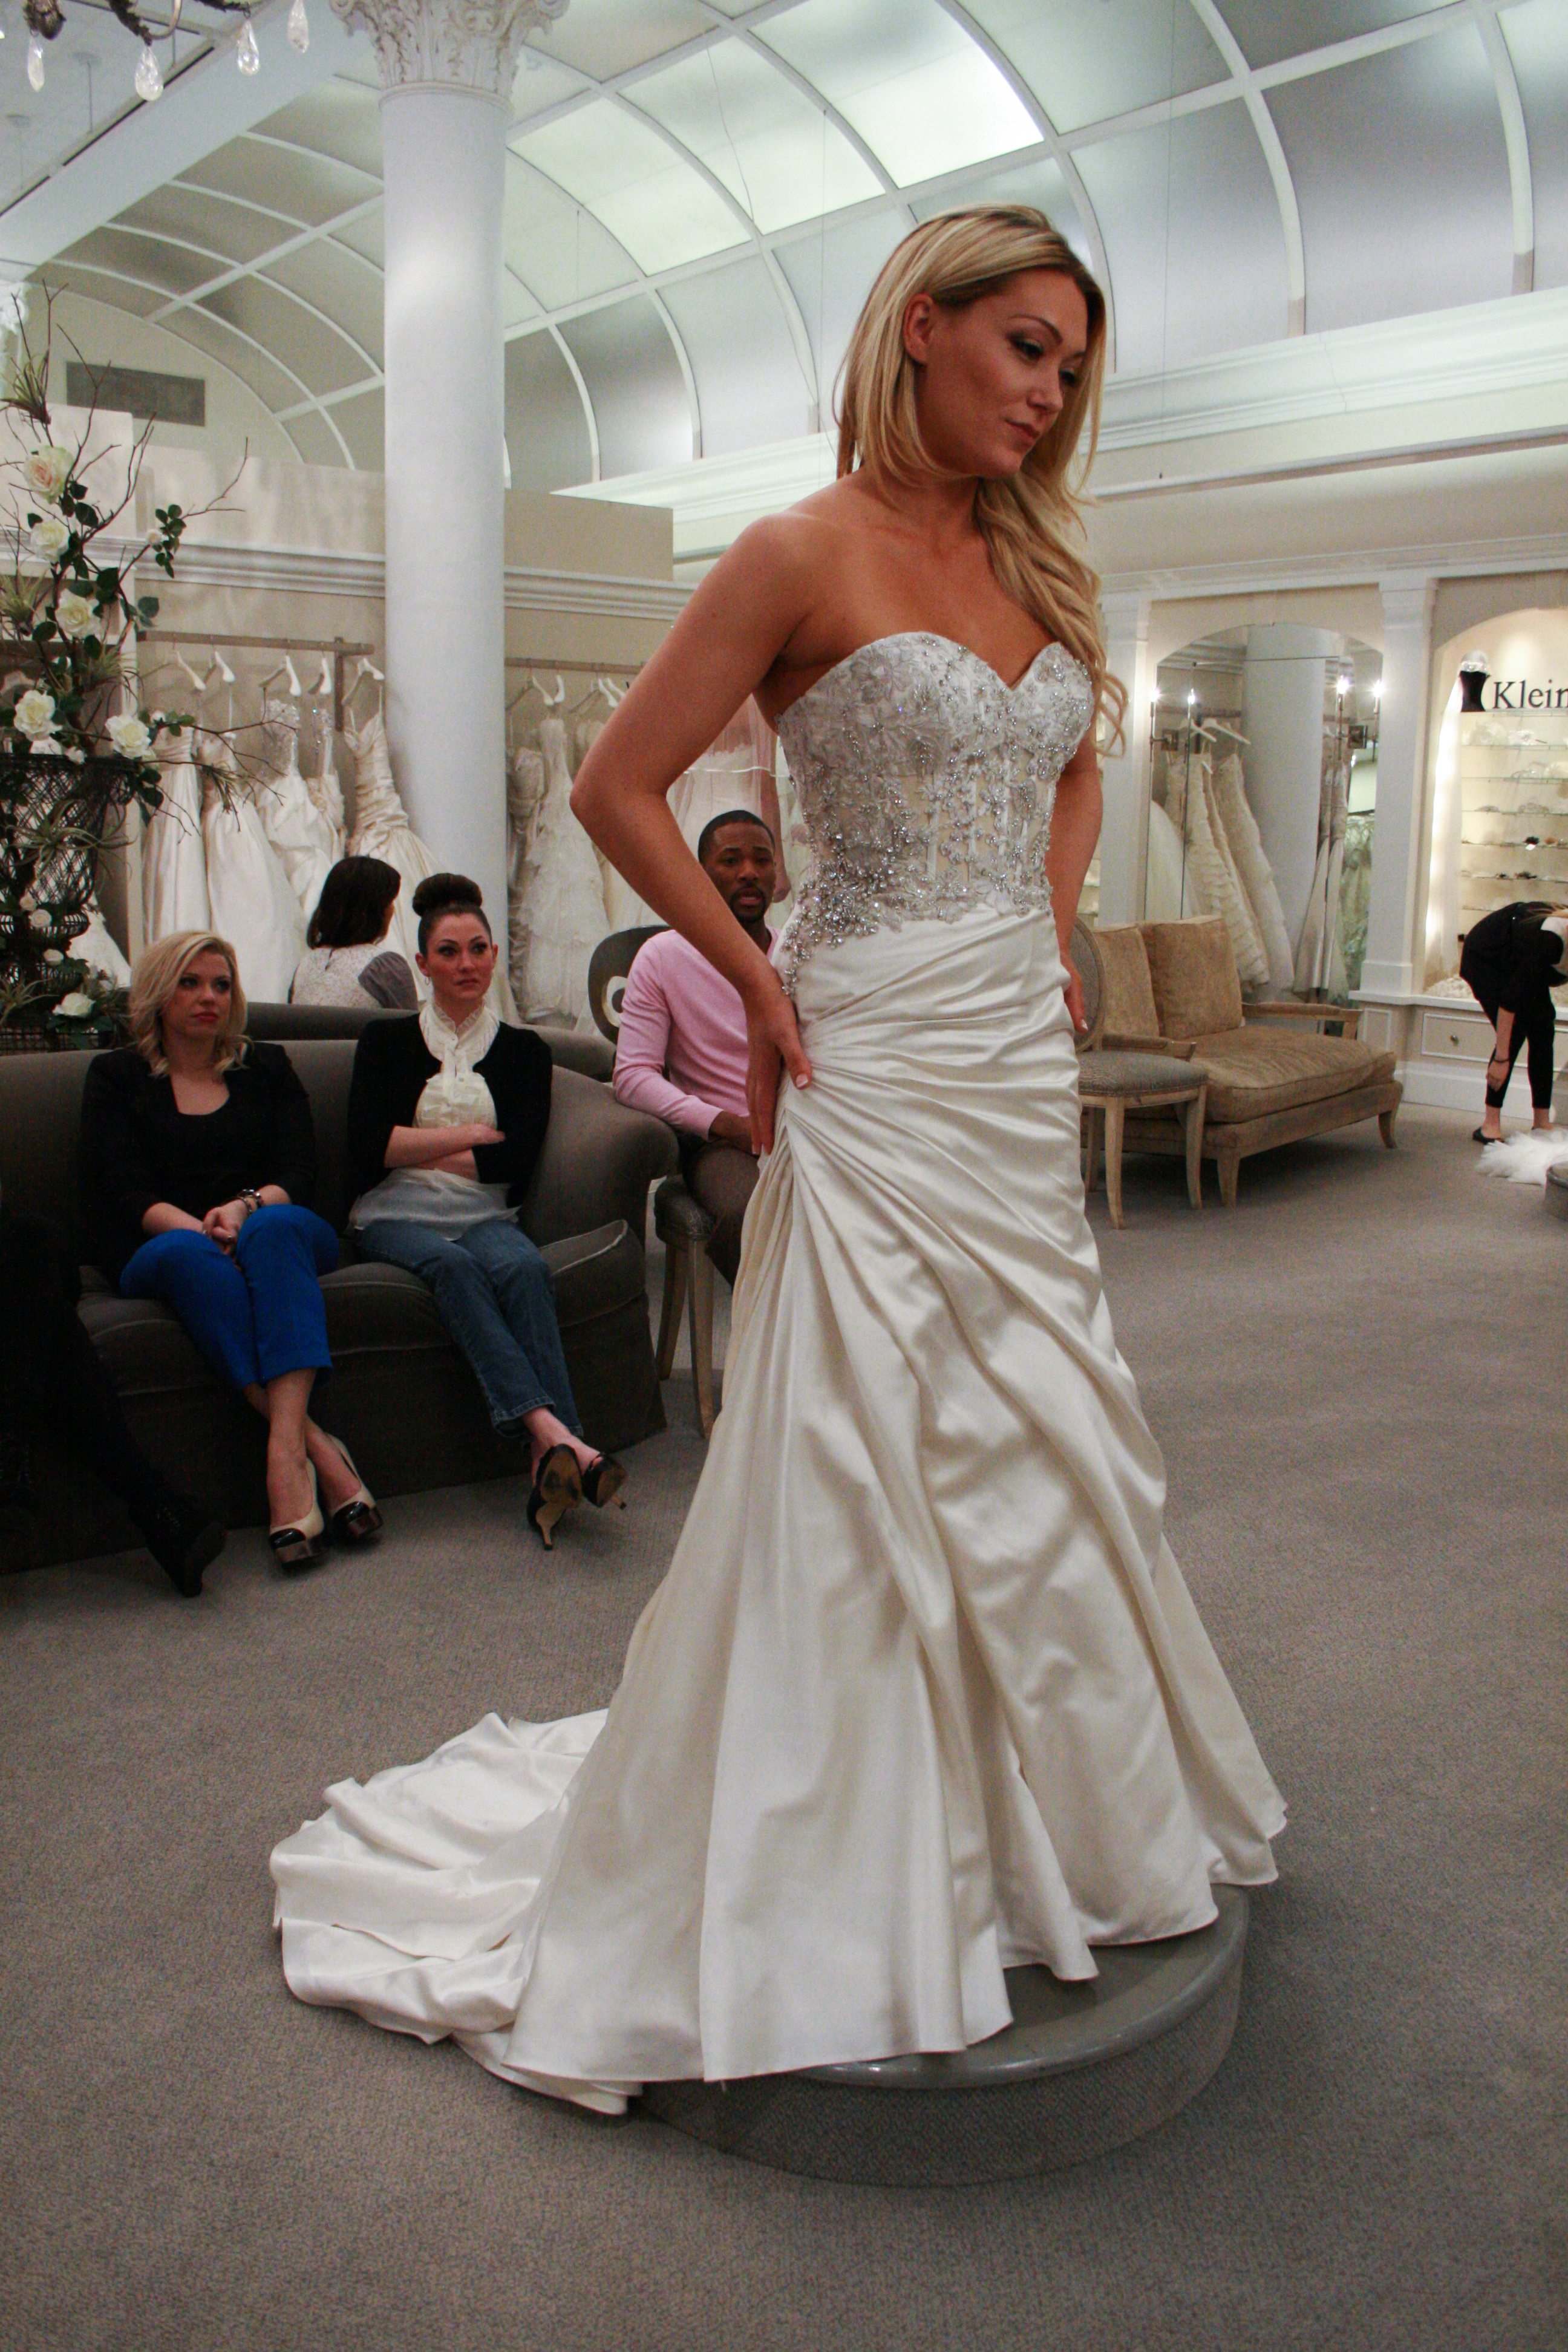 say yes to the dress